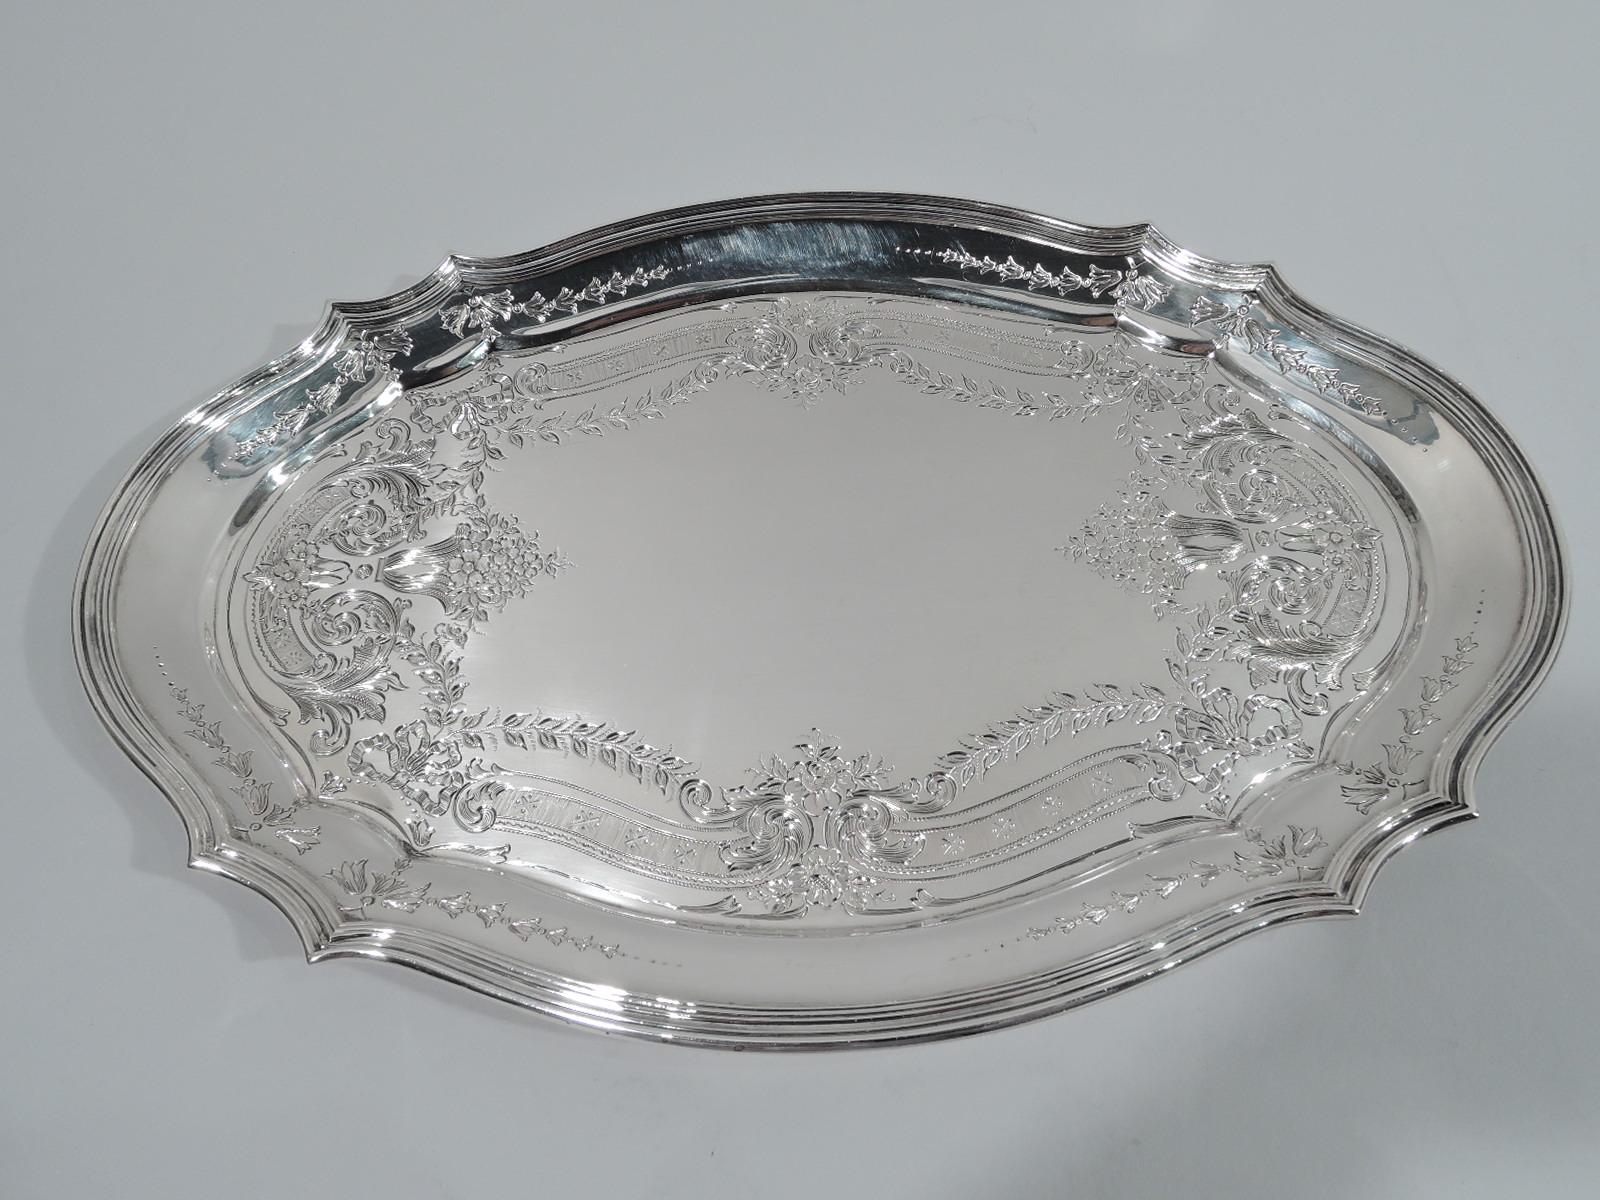 Edwardian Art Nouveau sterling silver vanity tray. Made by Tiffany & Co. in New York. Oval well with engraved flower baskets, garlands, and scrolls and shaped reeded rim. Fully marked including pattern no. 13365 (first produced in 1897) and